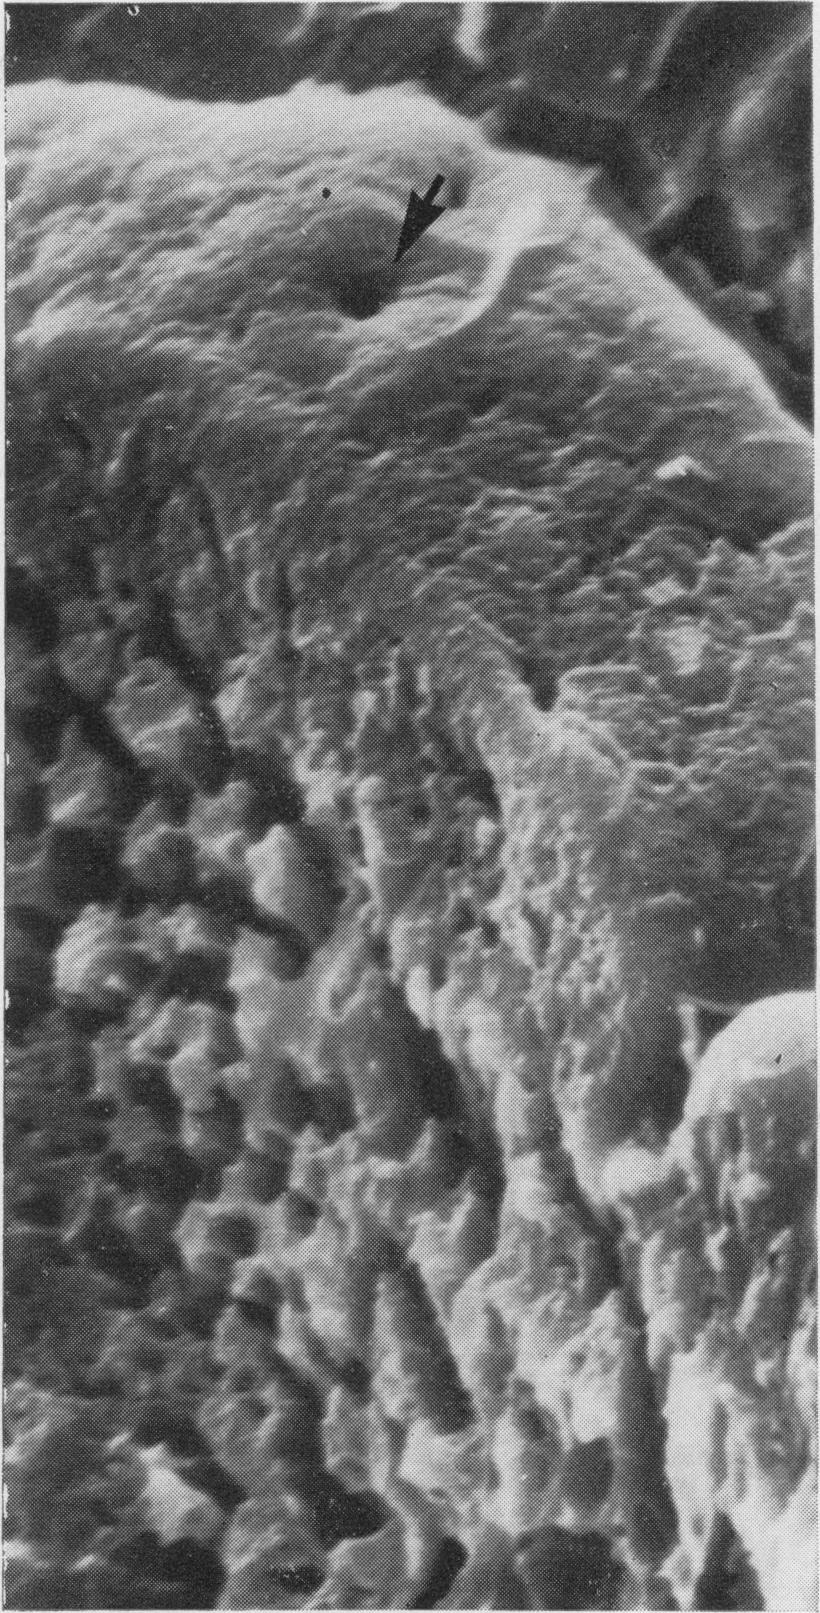 1 and 2). At high magnification (Marsh et al, 1968; Toner and Carr, 1969) hexagonal patterns formed by the close-packed apical surfaces of the columnar cells may be seen.